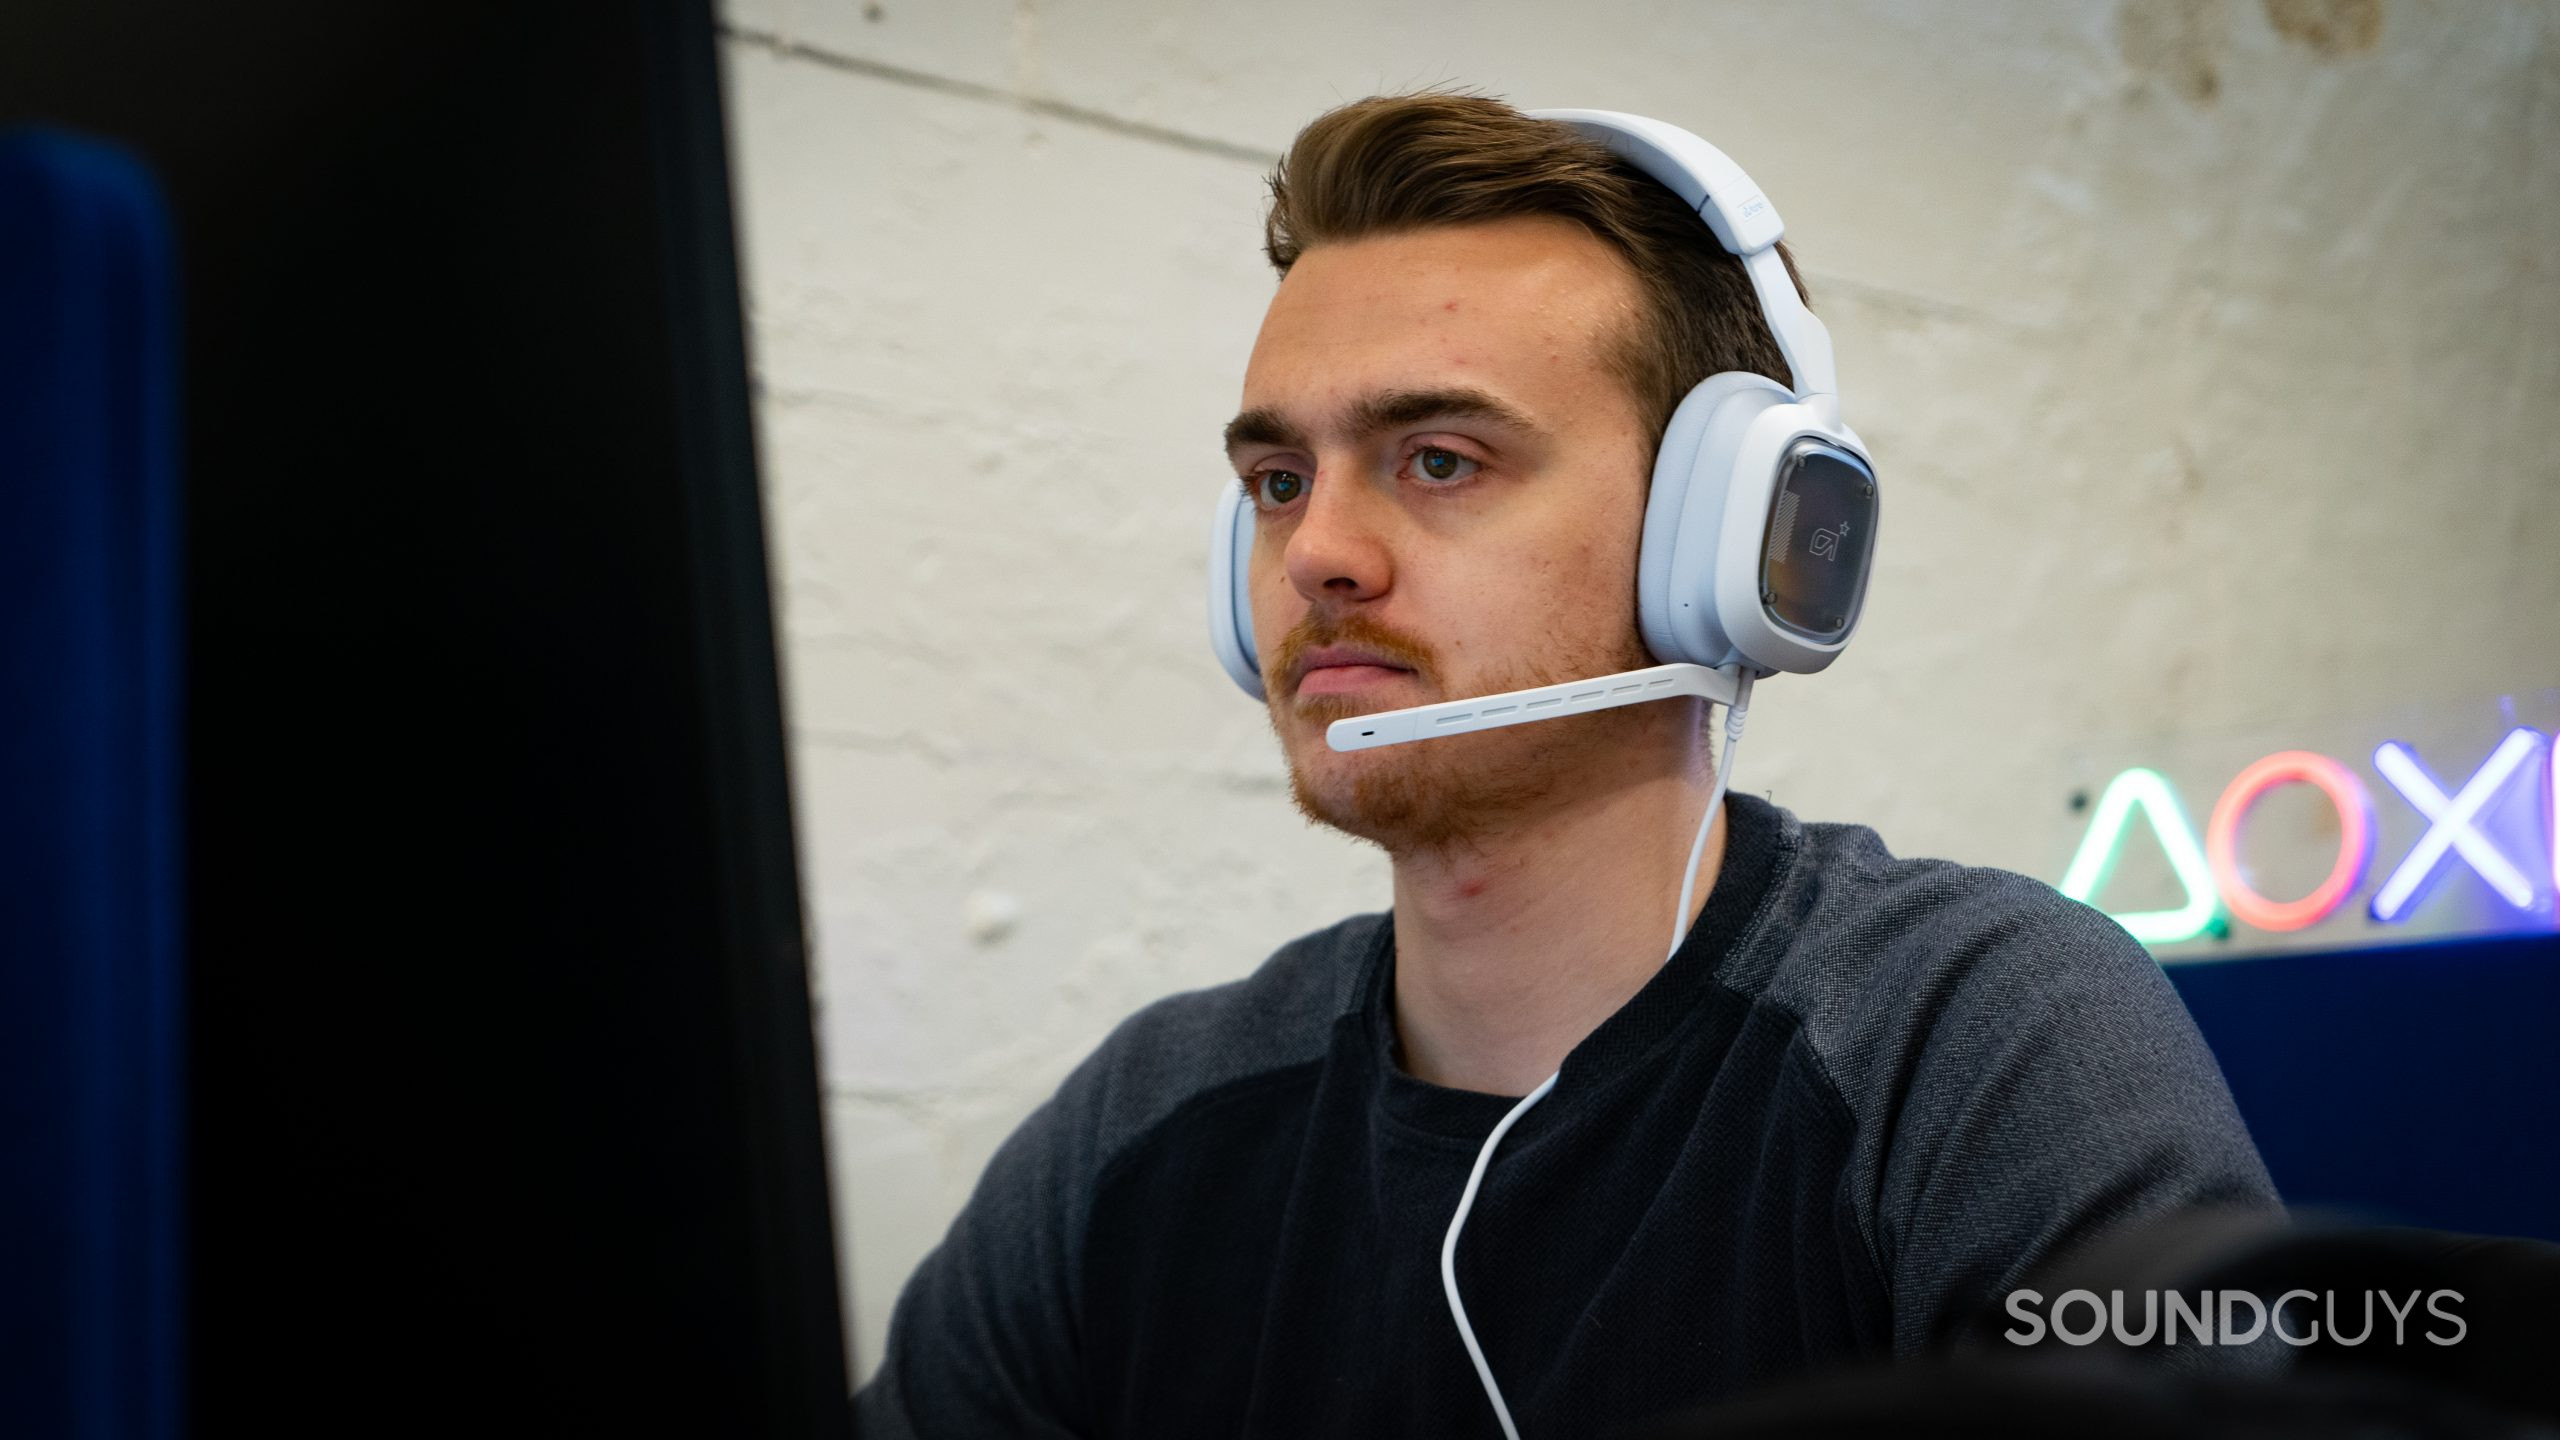 The Astro A30 headset being worn.